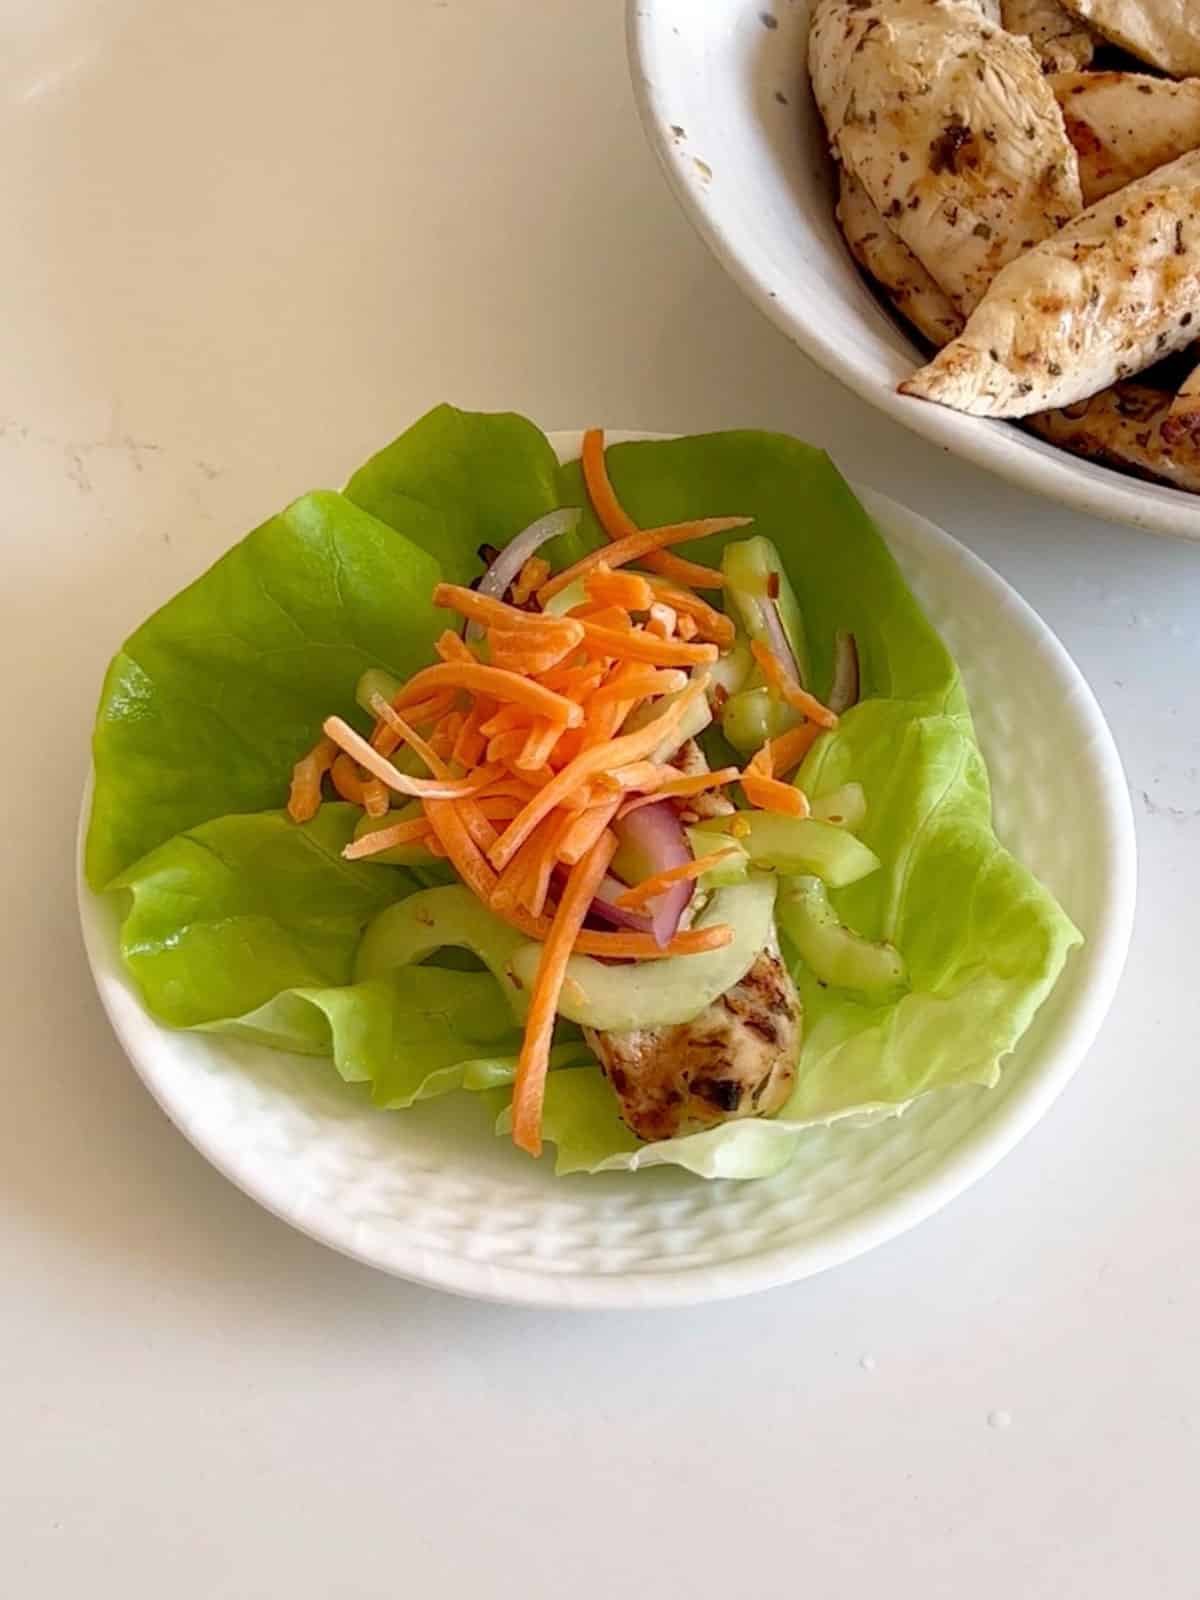 Toppings on the chicken lettuce wrap on a white plate.